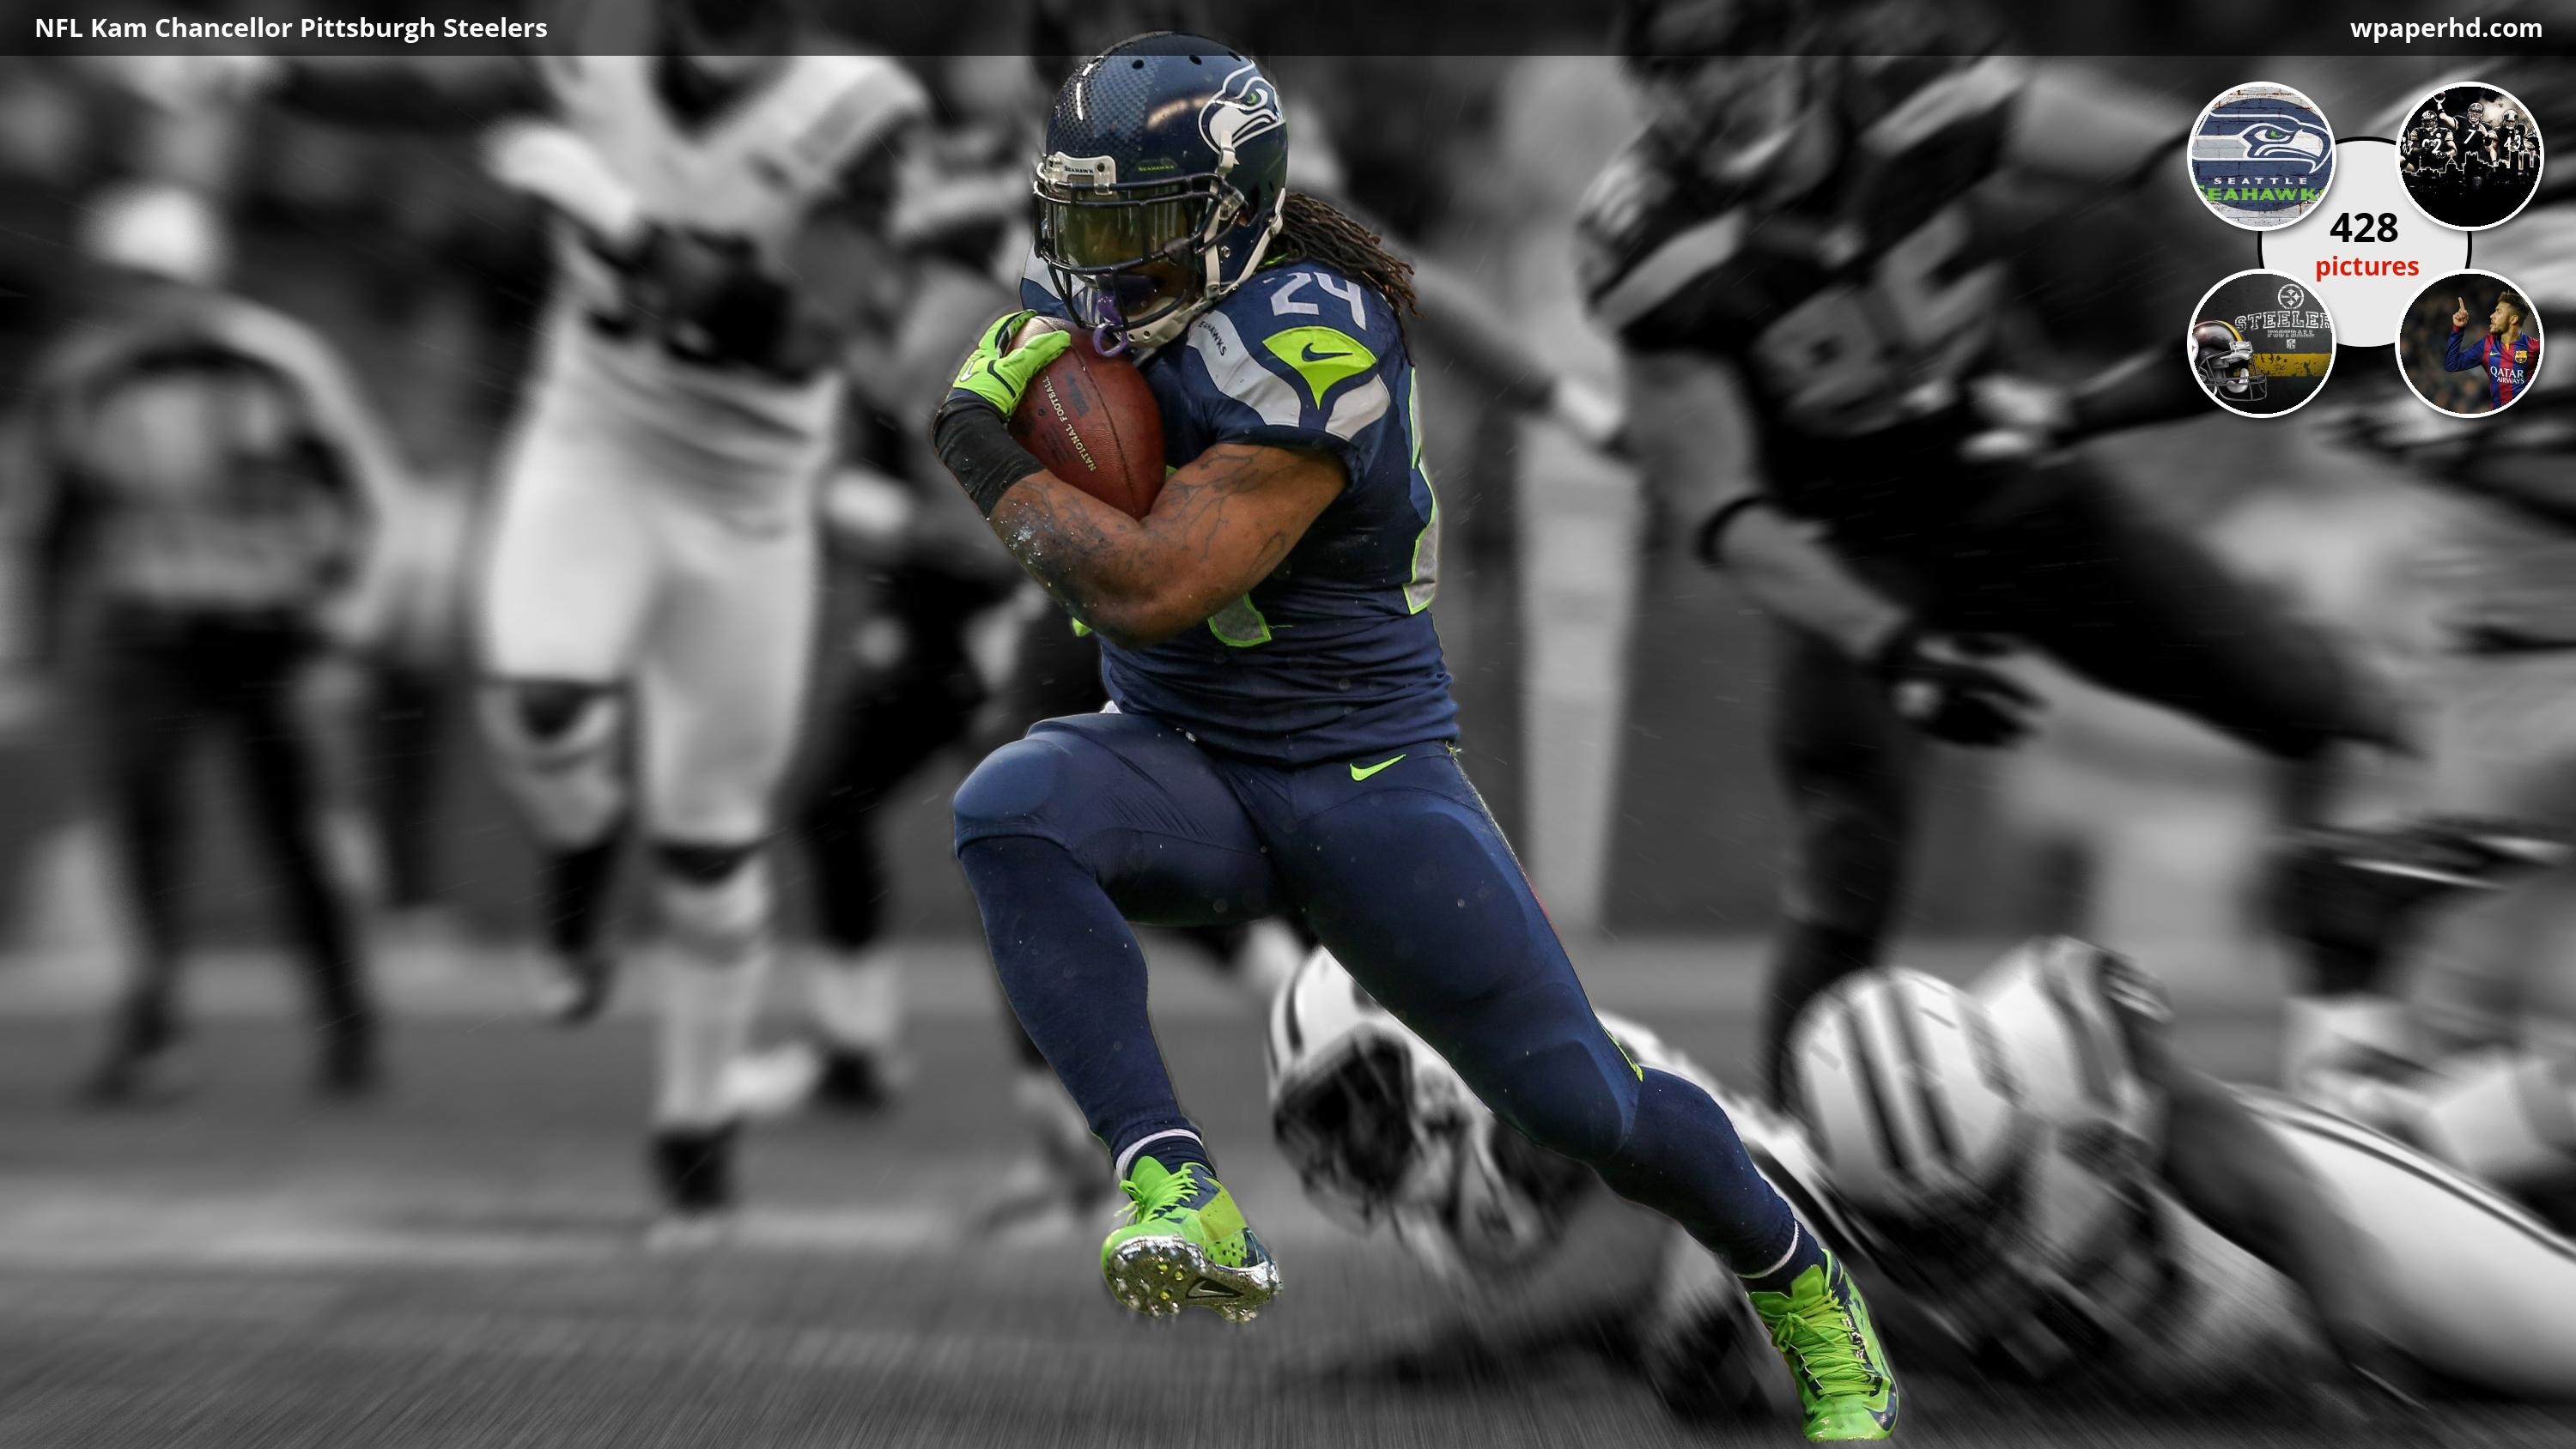 3000x1688 You are on page with NFL Kam Chancellor Pittsburgh Steelers wallpaper,  where you can download this picture in Original size and ...